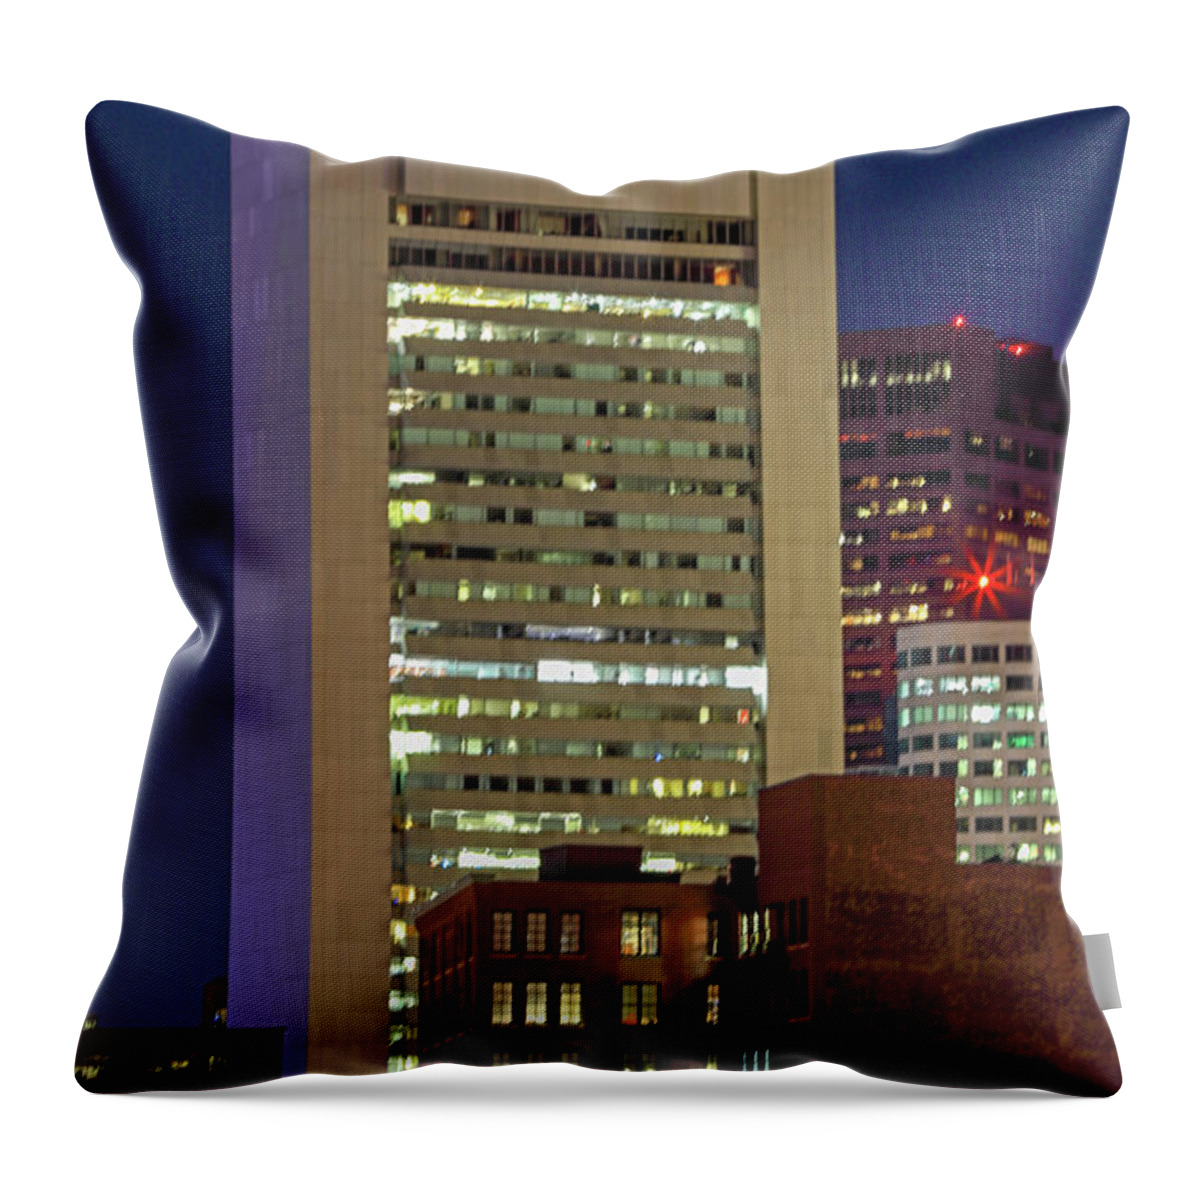 Federal Reserve Bank Of Boston Throw Pillow featuring the photograph Federal Reserve Bank of Boston by Juergen Roth